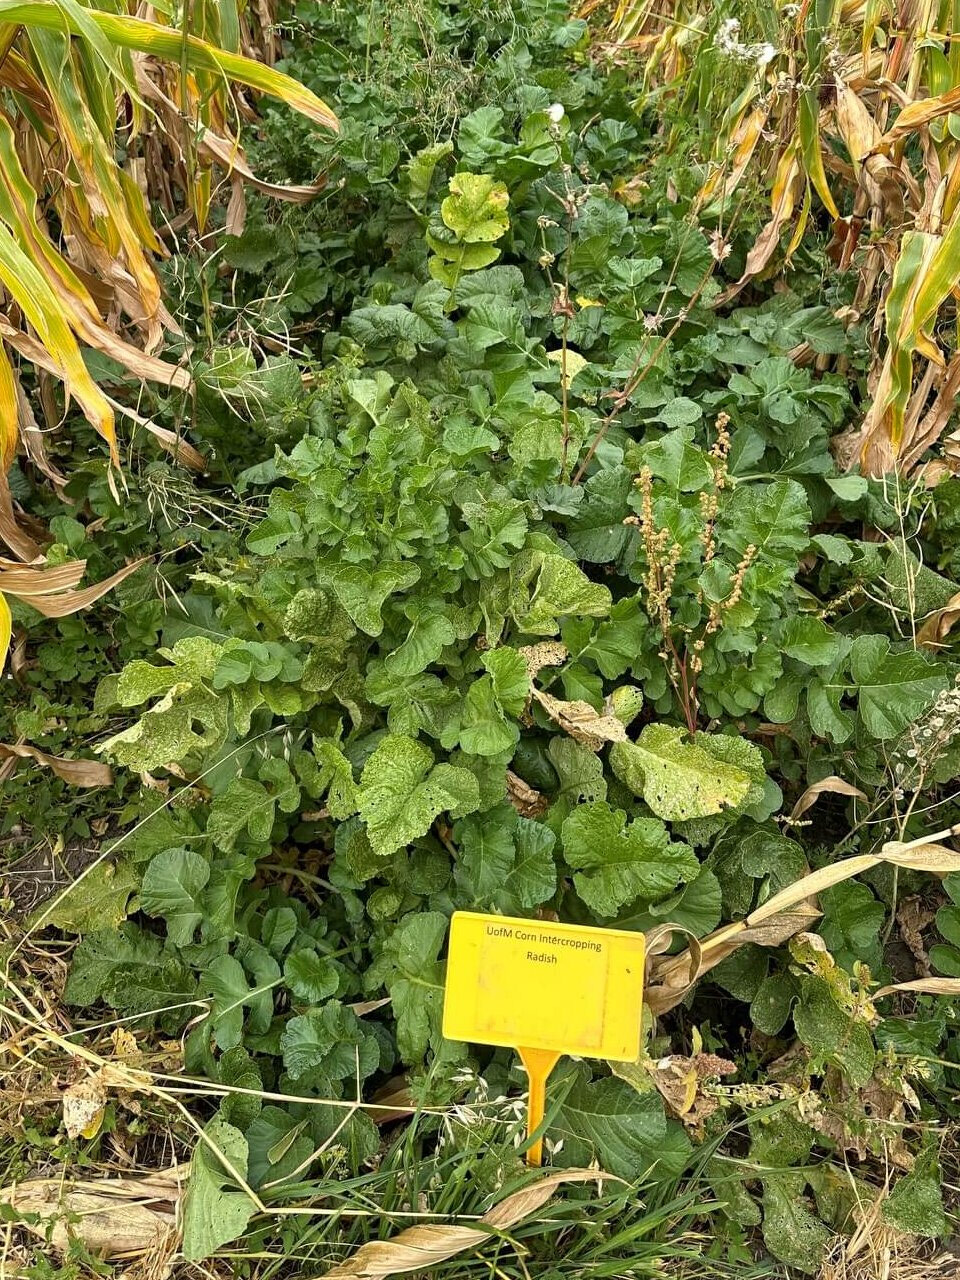 Corn intercropping strategies for extended winter grazing